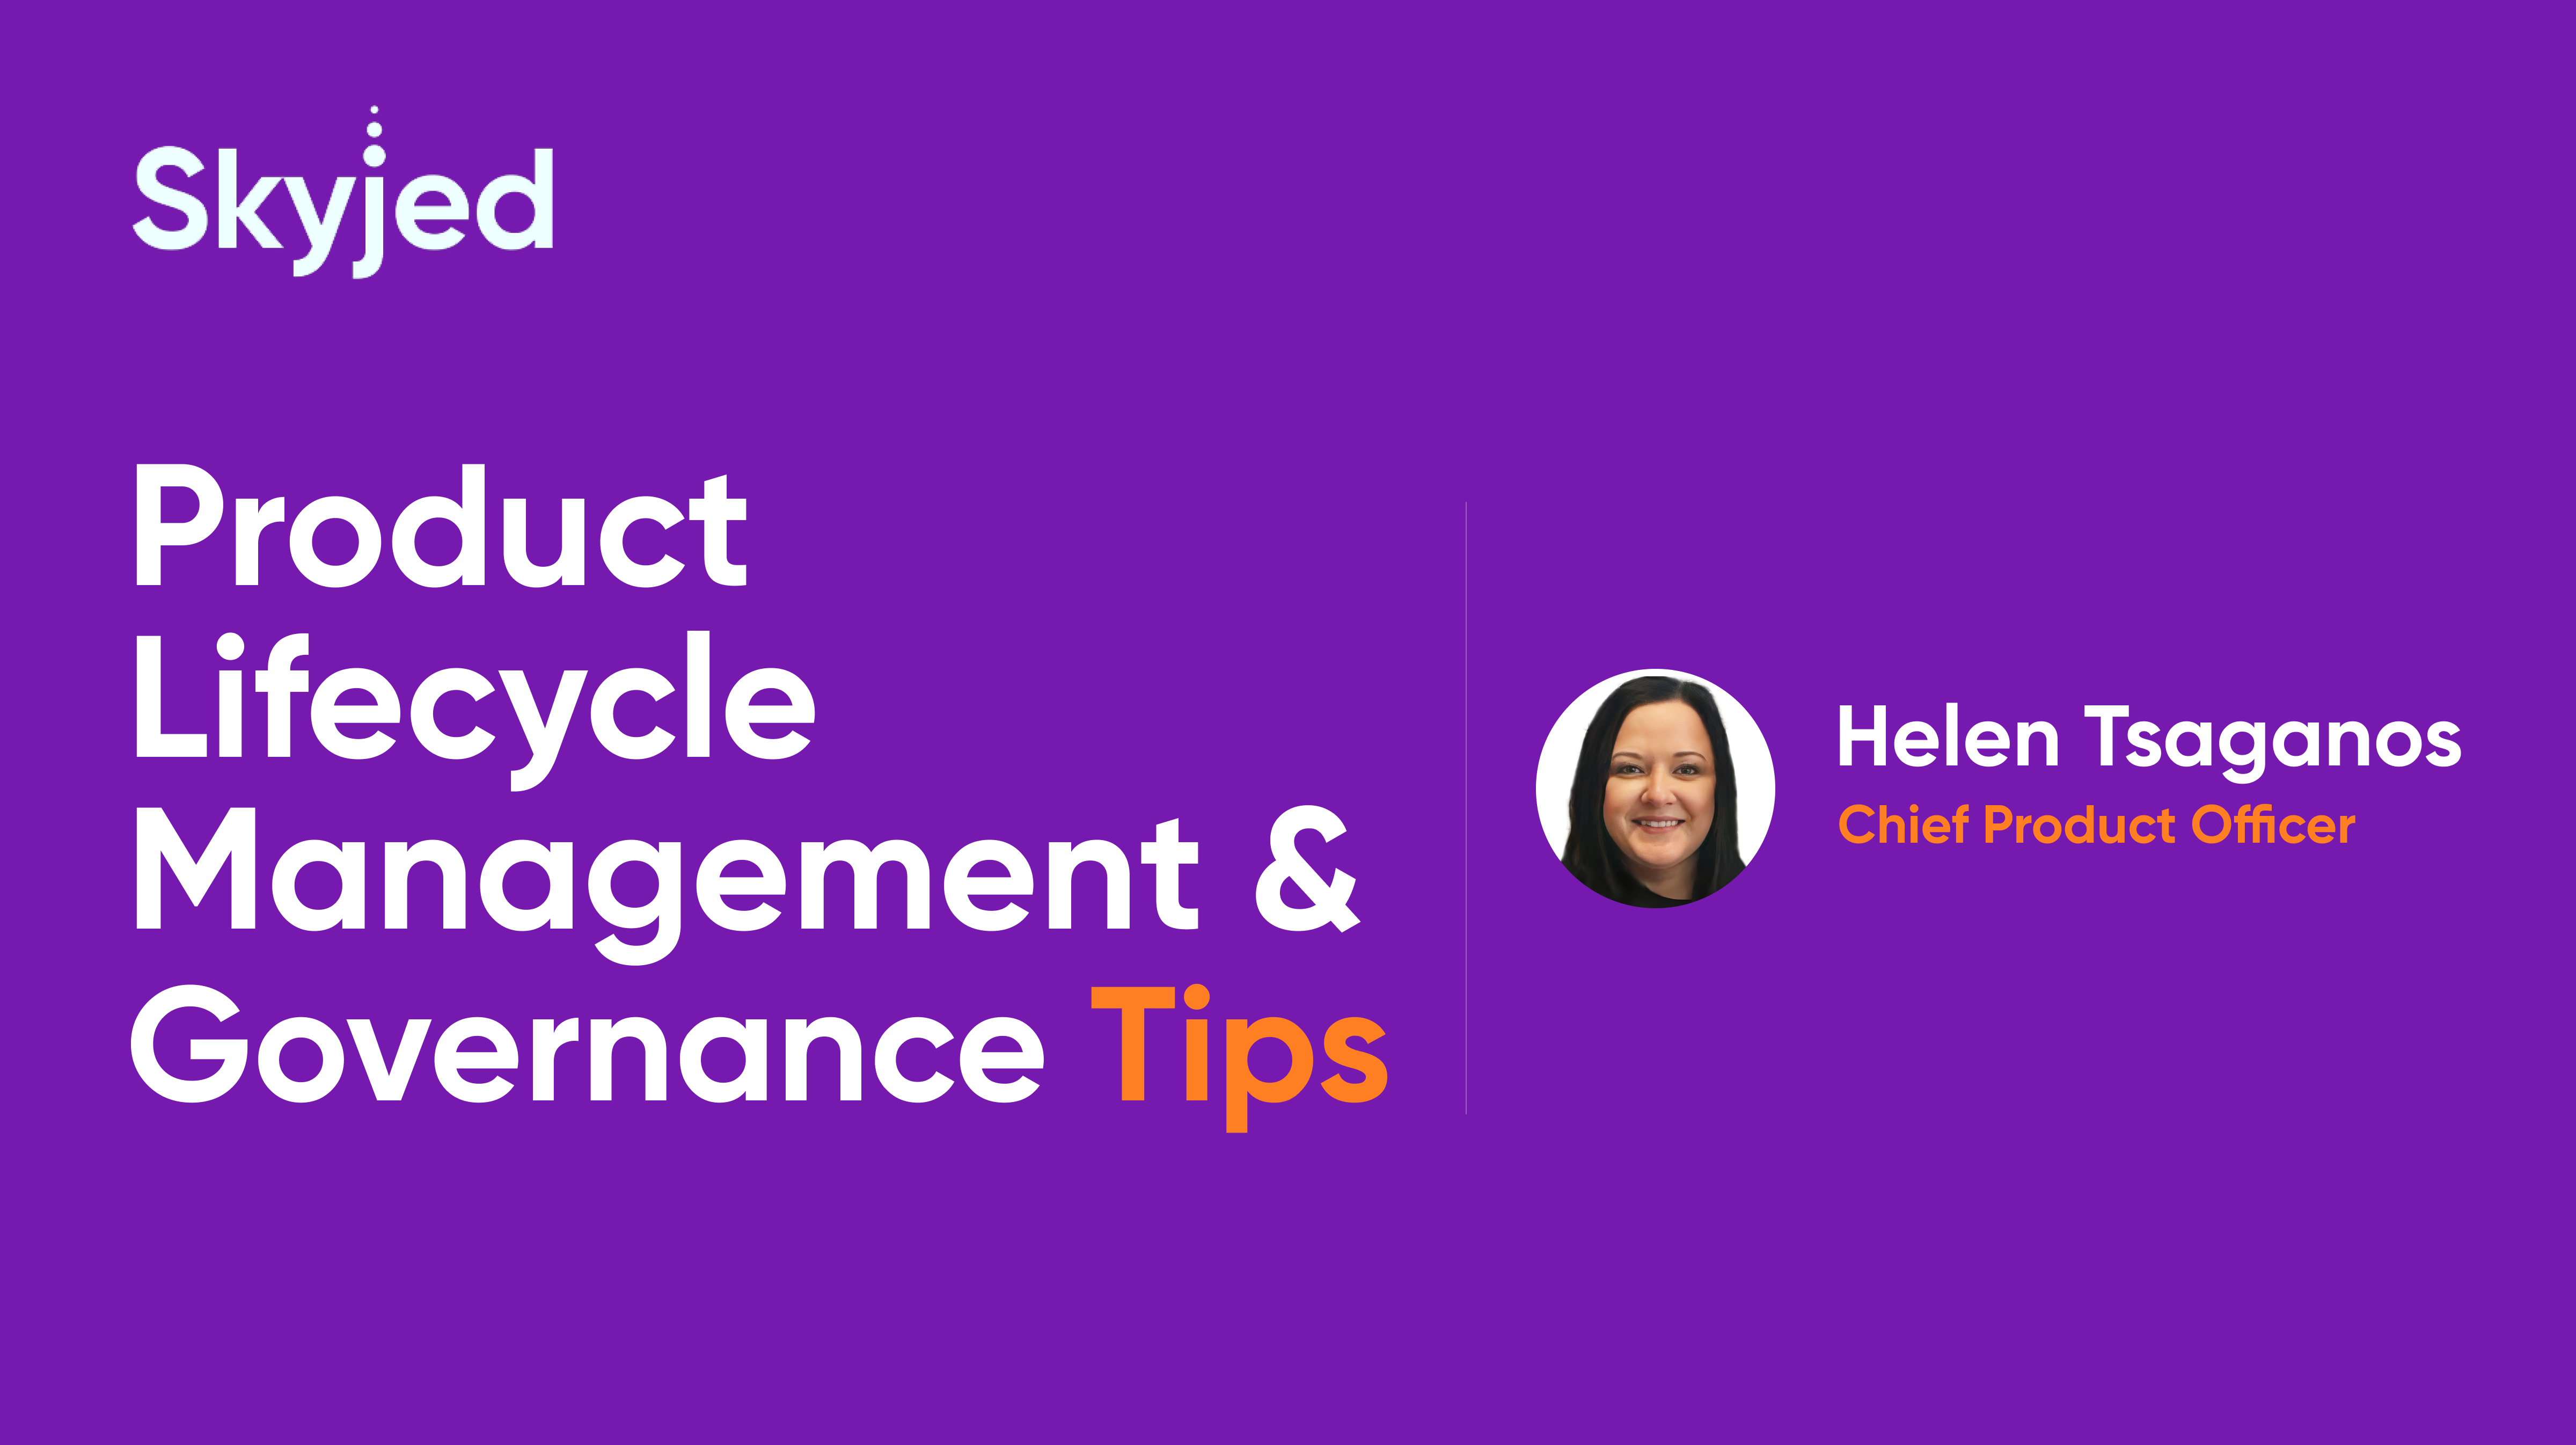 How to Use Product Lifecycle Management & Governance to Improve Compliance